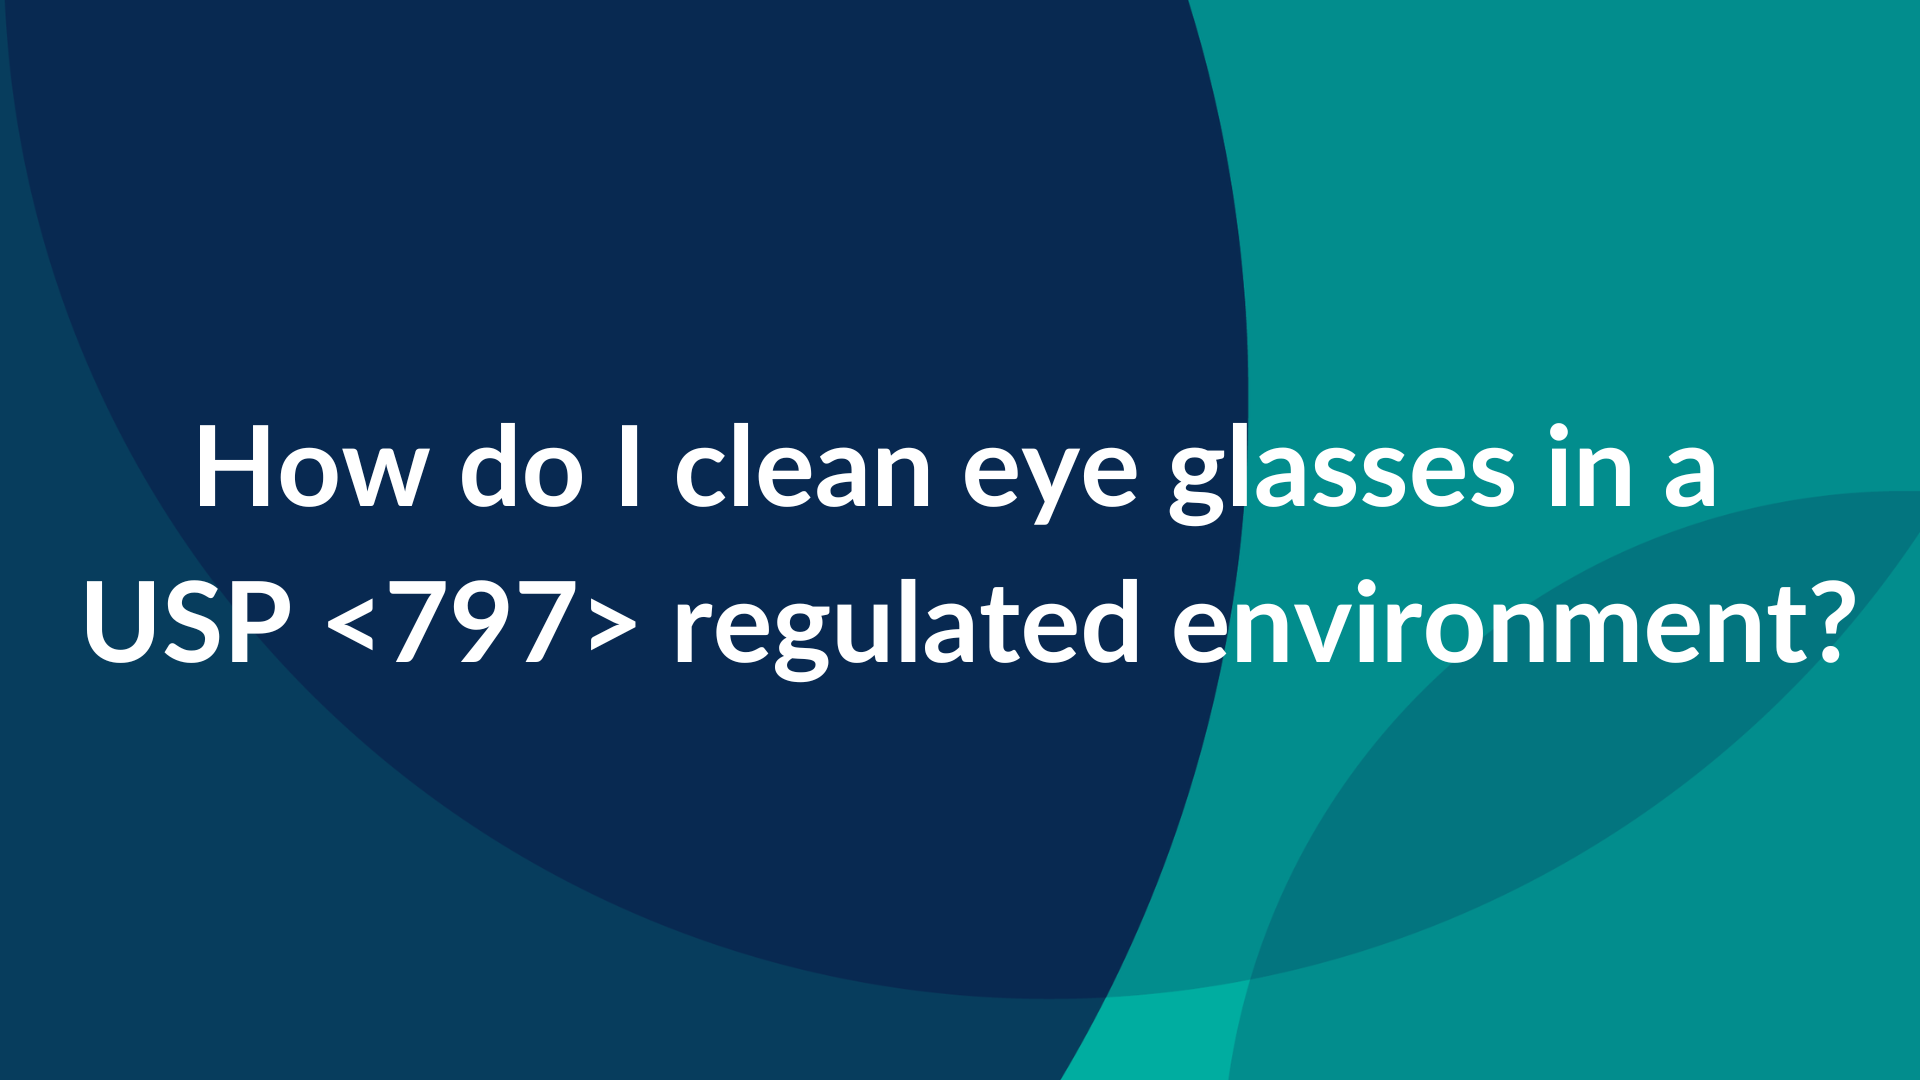 Image of How Do I Clean Eye Glasses in a USP<797> Regulated Environment?